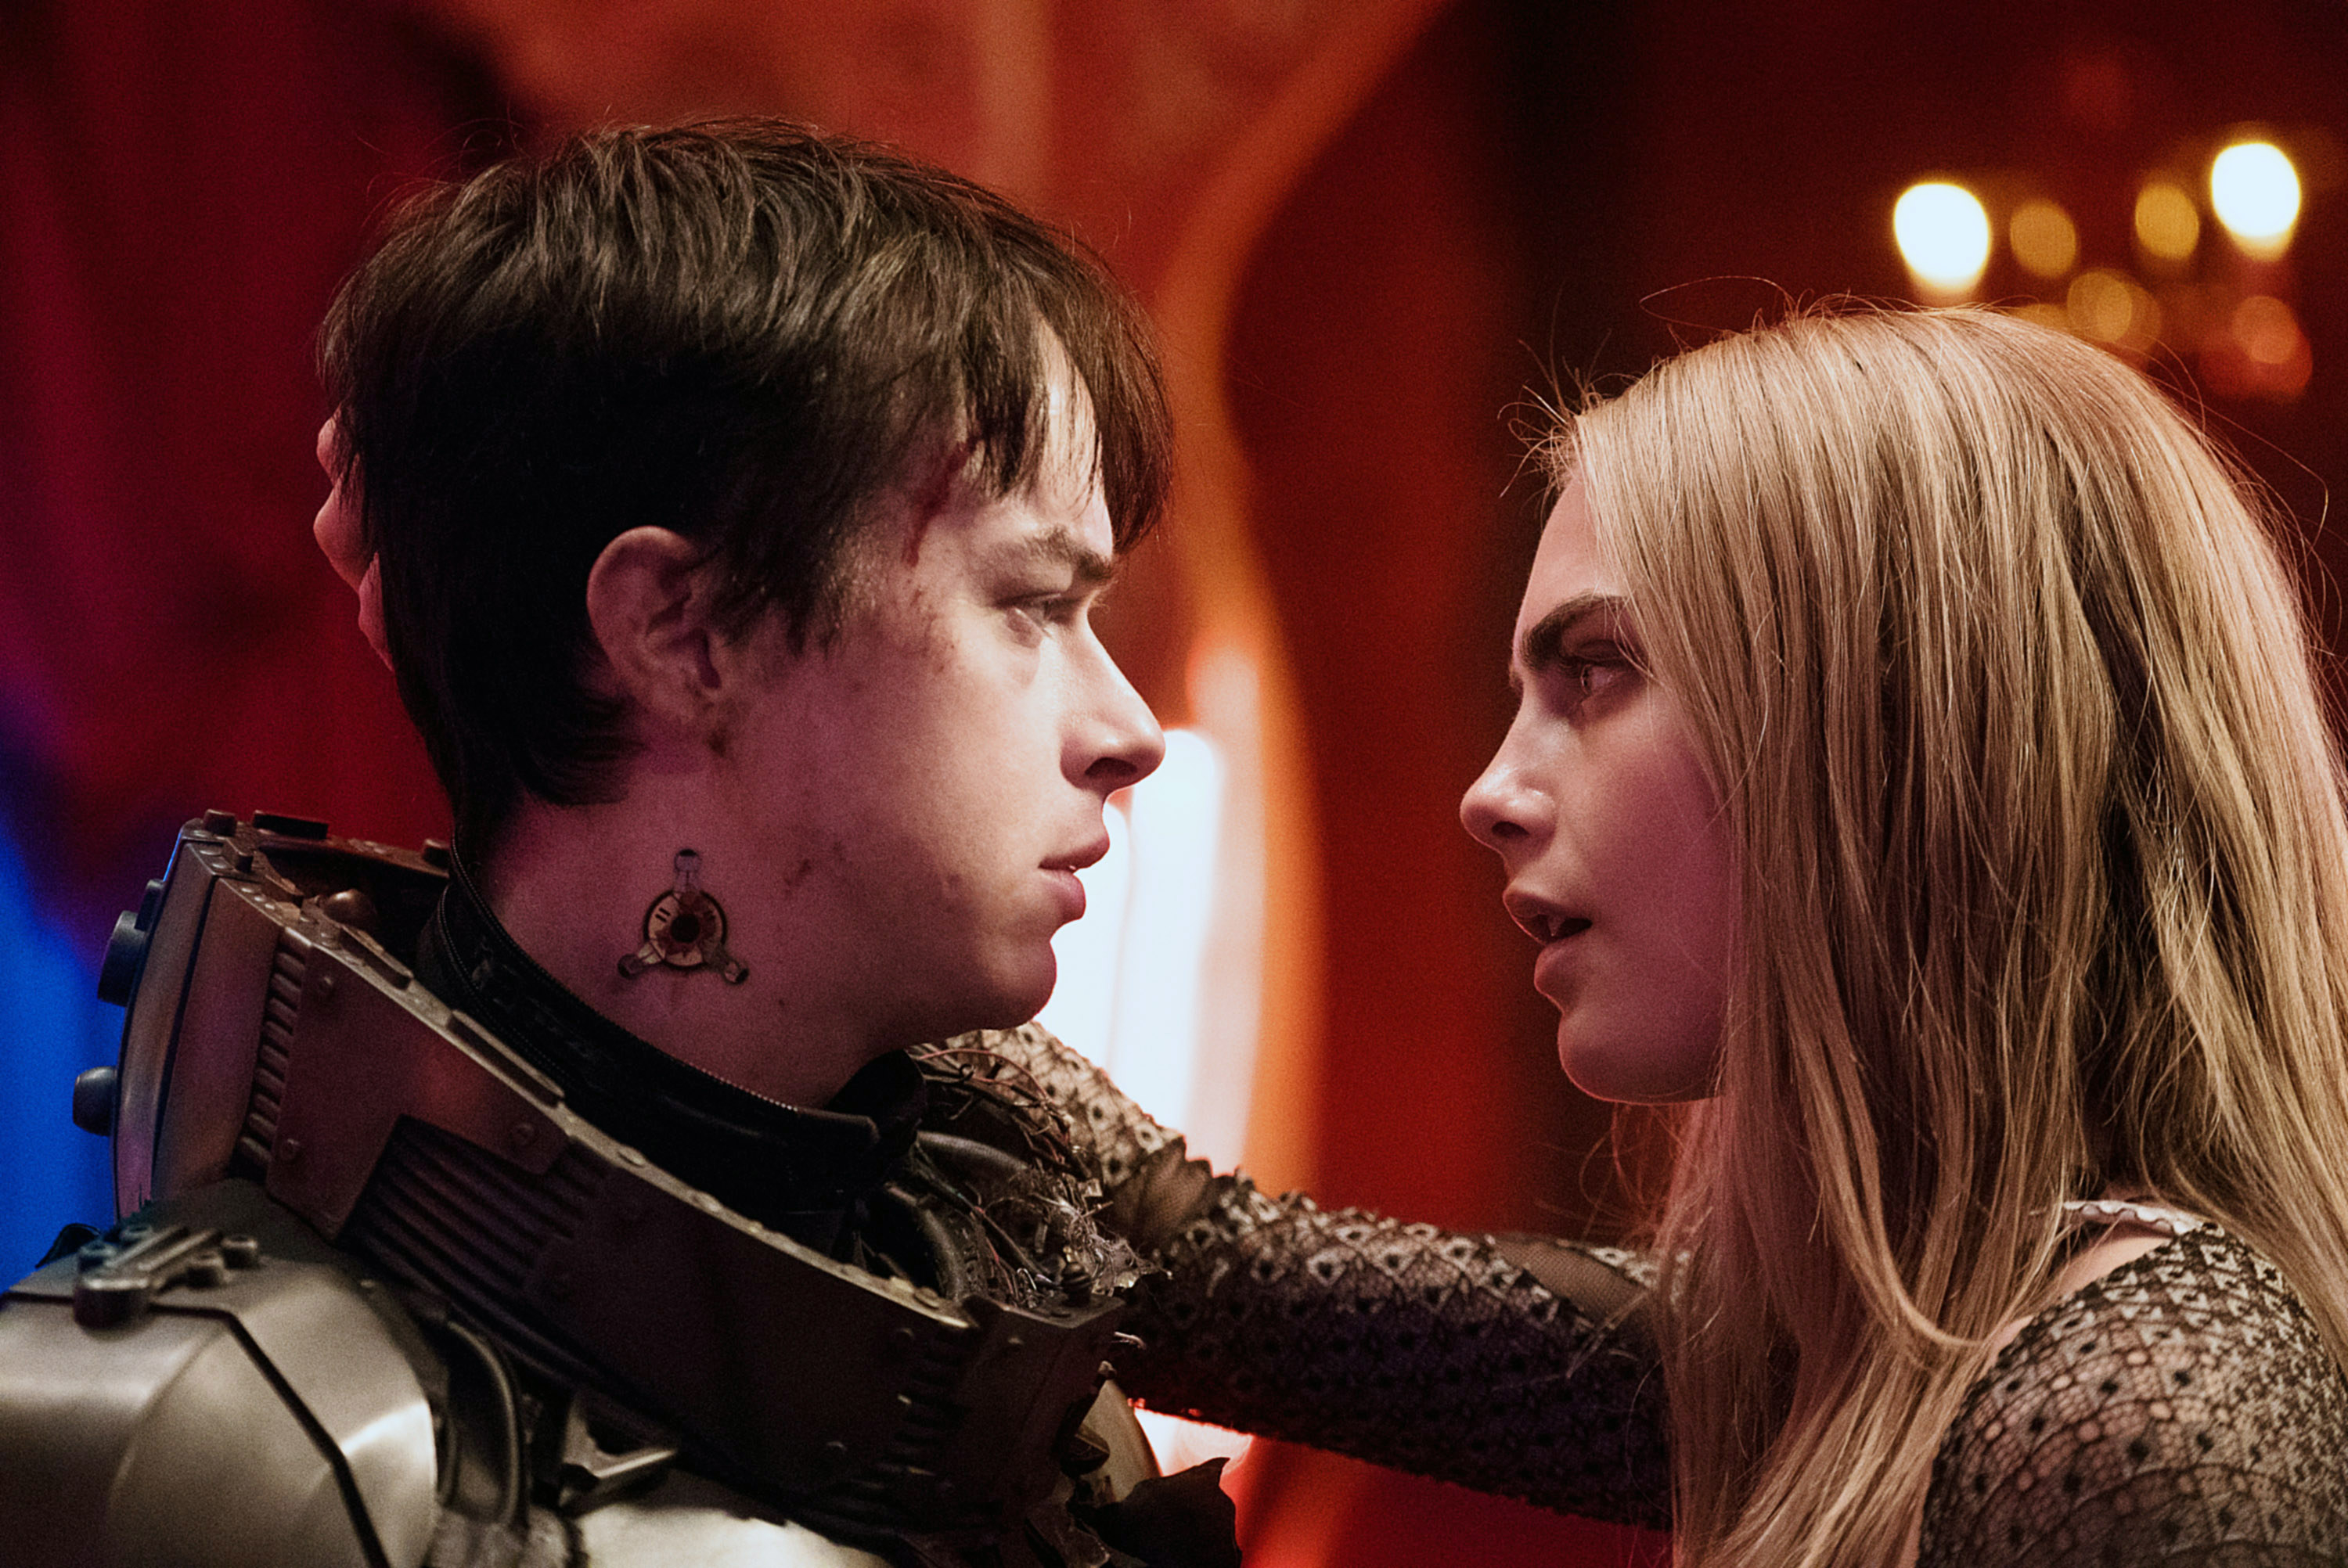 &quot;VALERIAN AND THE CITY OF A THOUSAND PLANETS&quot;